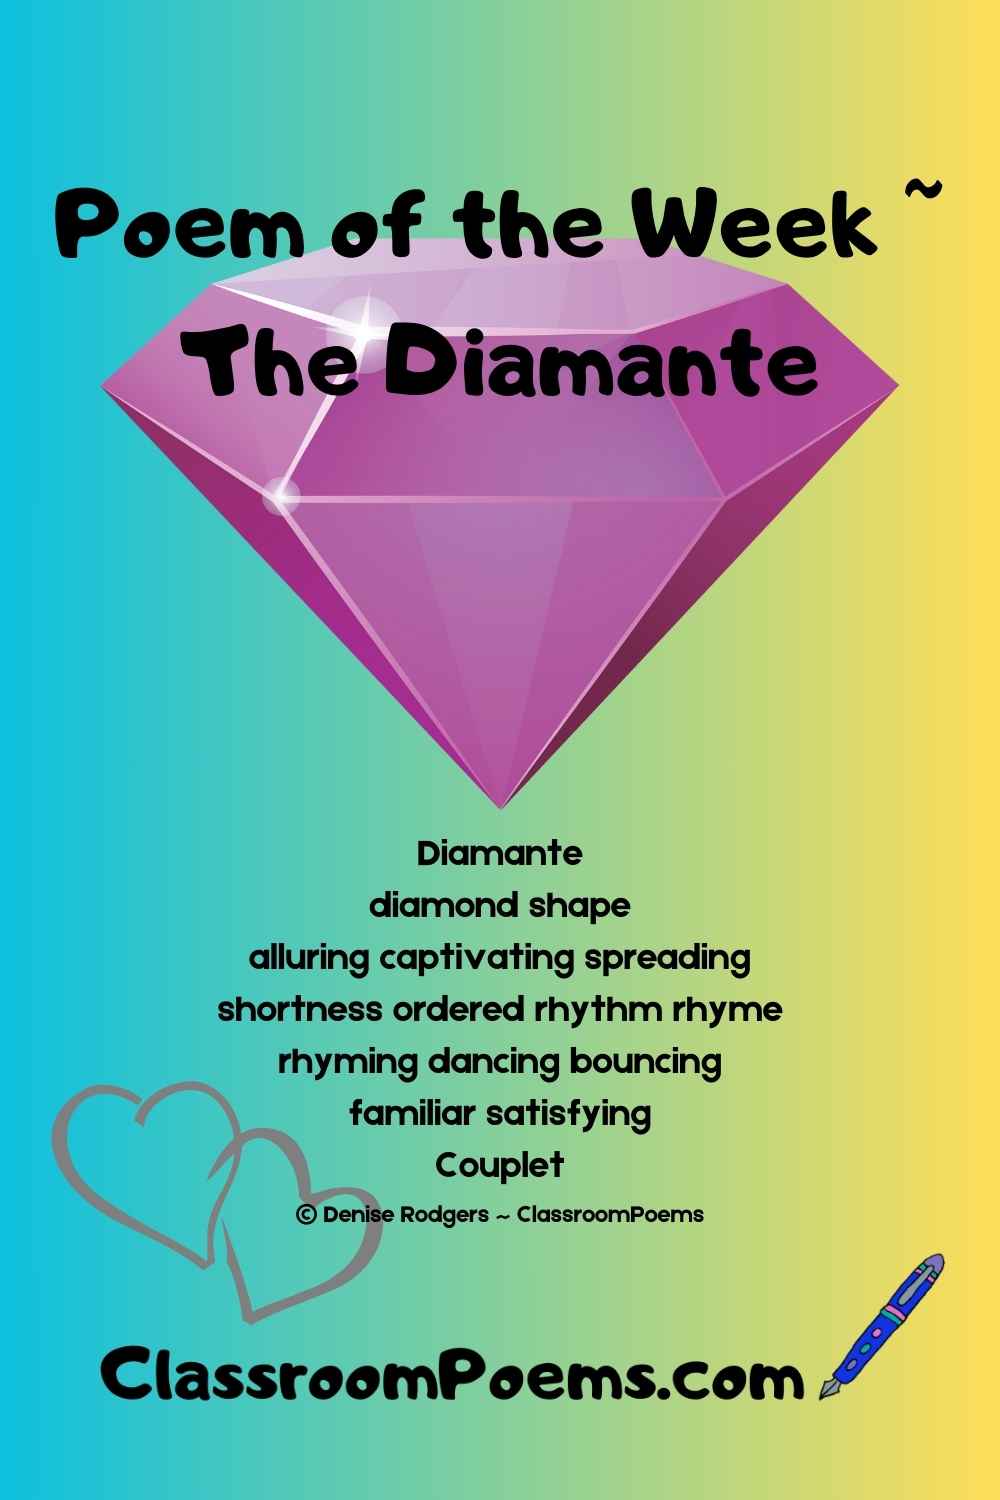 Diamante poems by Denise Rodgers on ClassroomPoems.com.